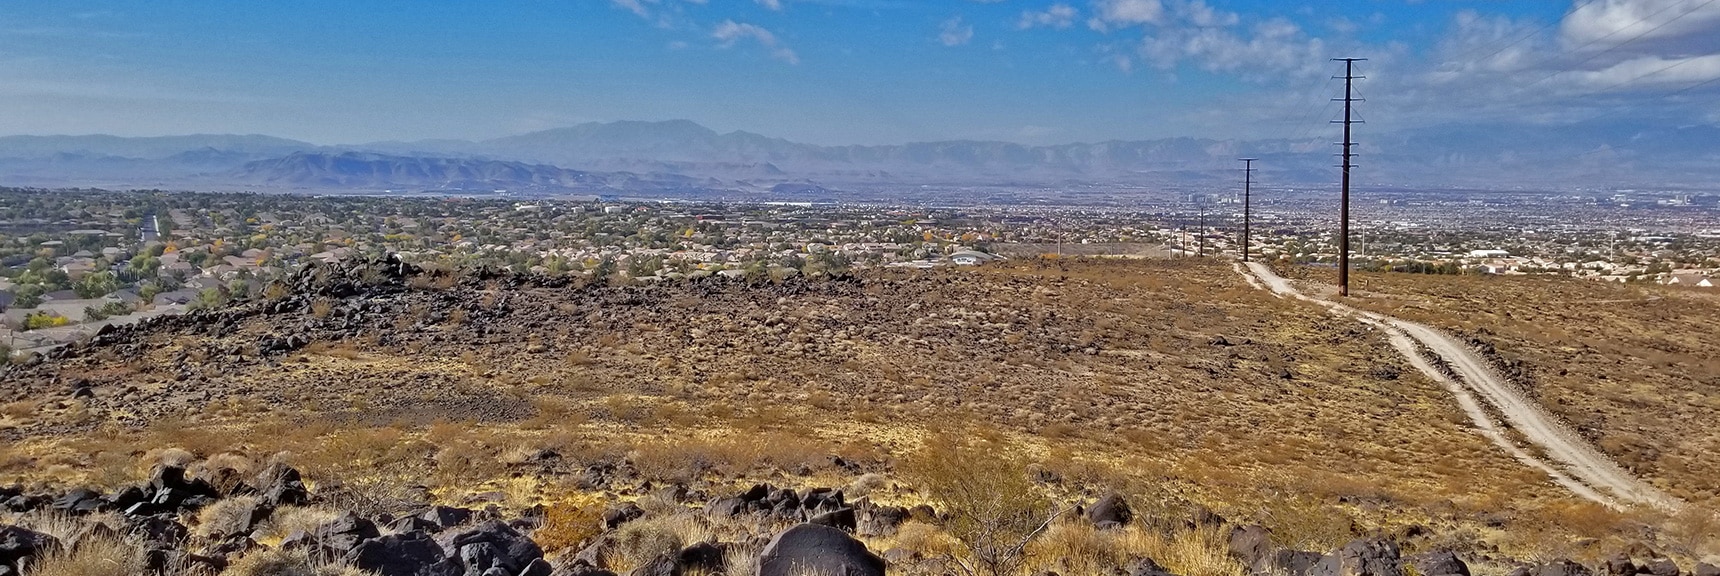 Las Vegas Valley, Potosi Mt. and Rainbow Mountains Viewed from Above Anthem| McCullough Hills Trail in Sloan Canyon National Conservation Area, Nevada